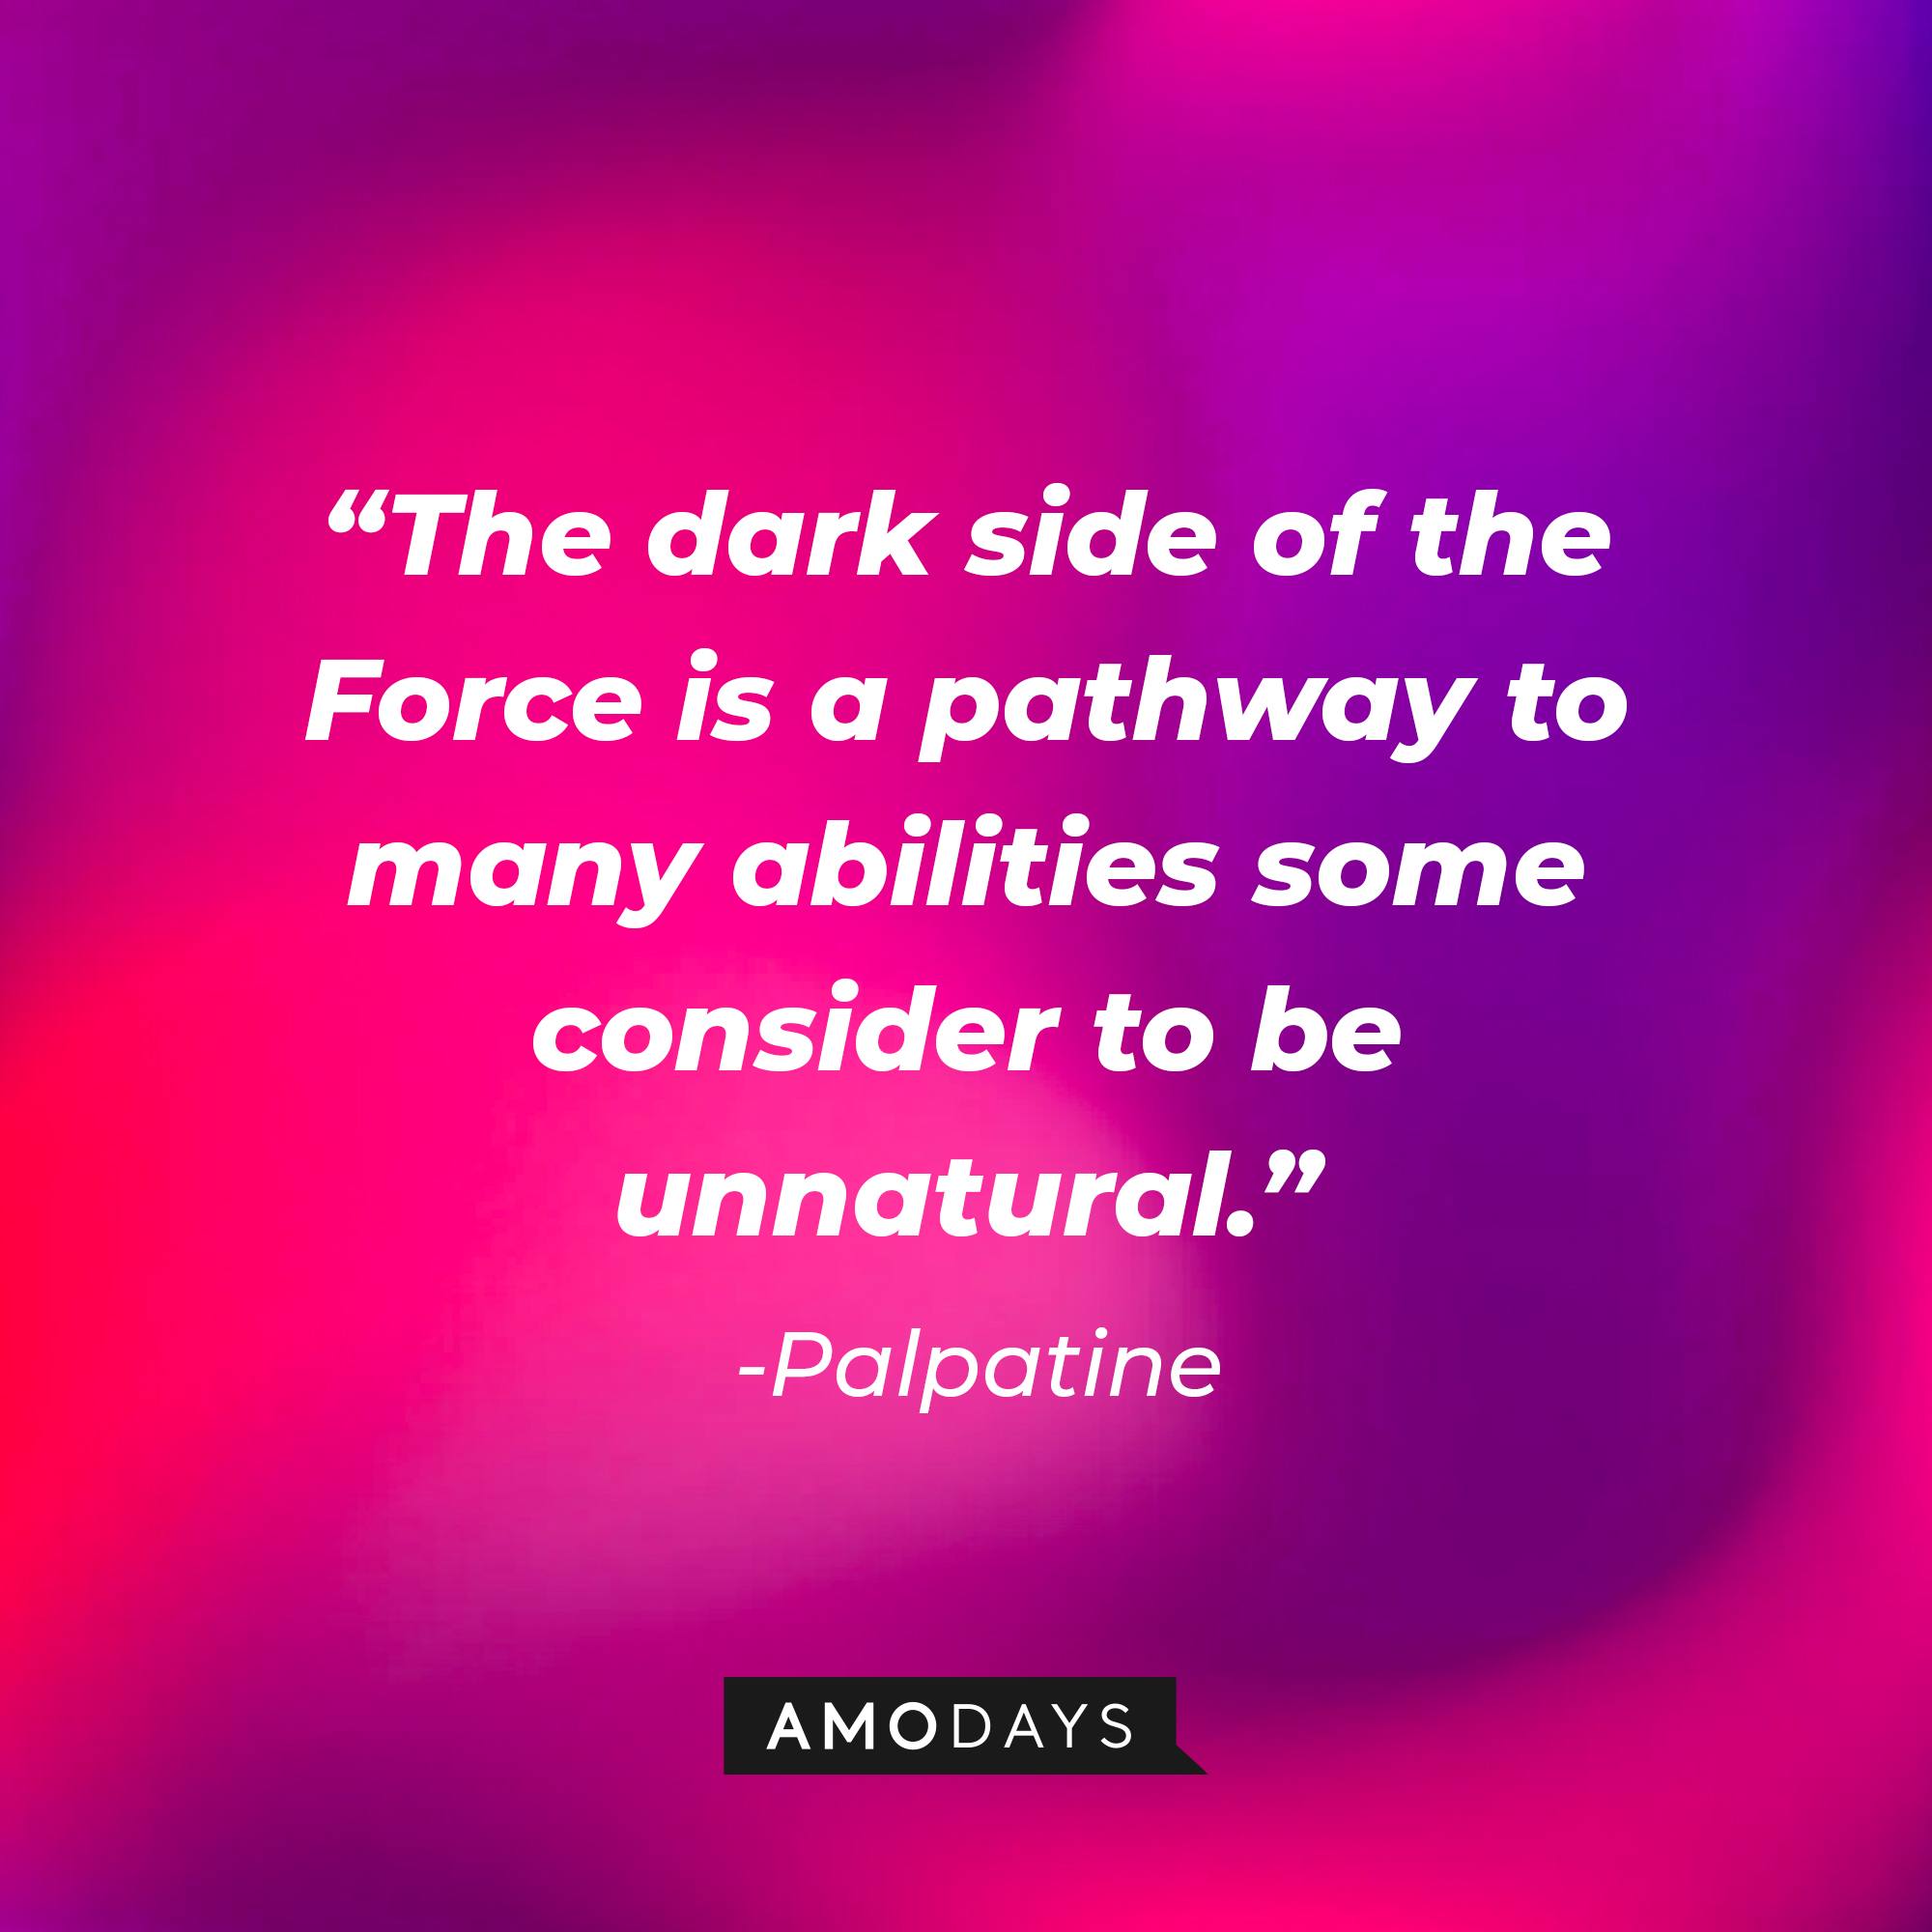 Palpatine’s quote: “The dark side of the Force is a pathway to many abilities some consider to be unnatural.” | Source: AmoDays